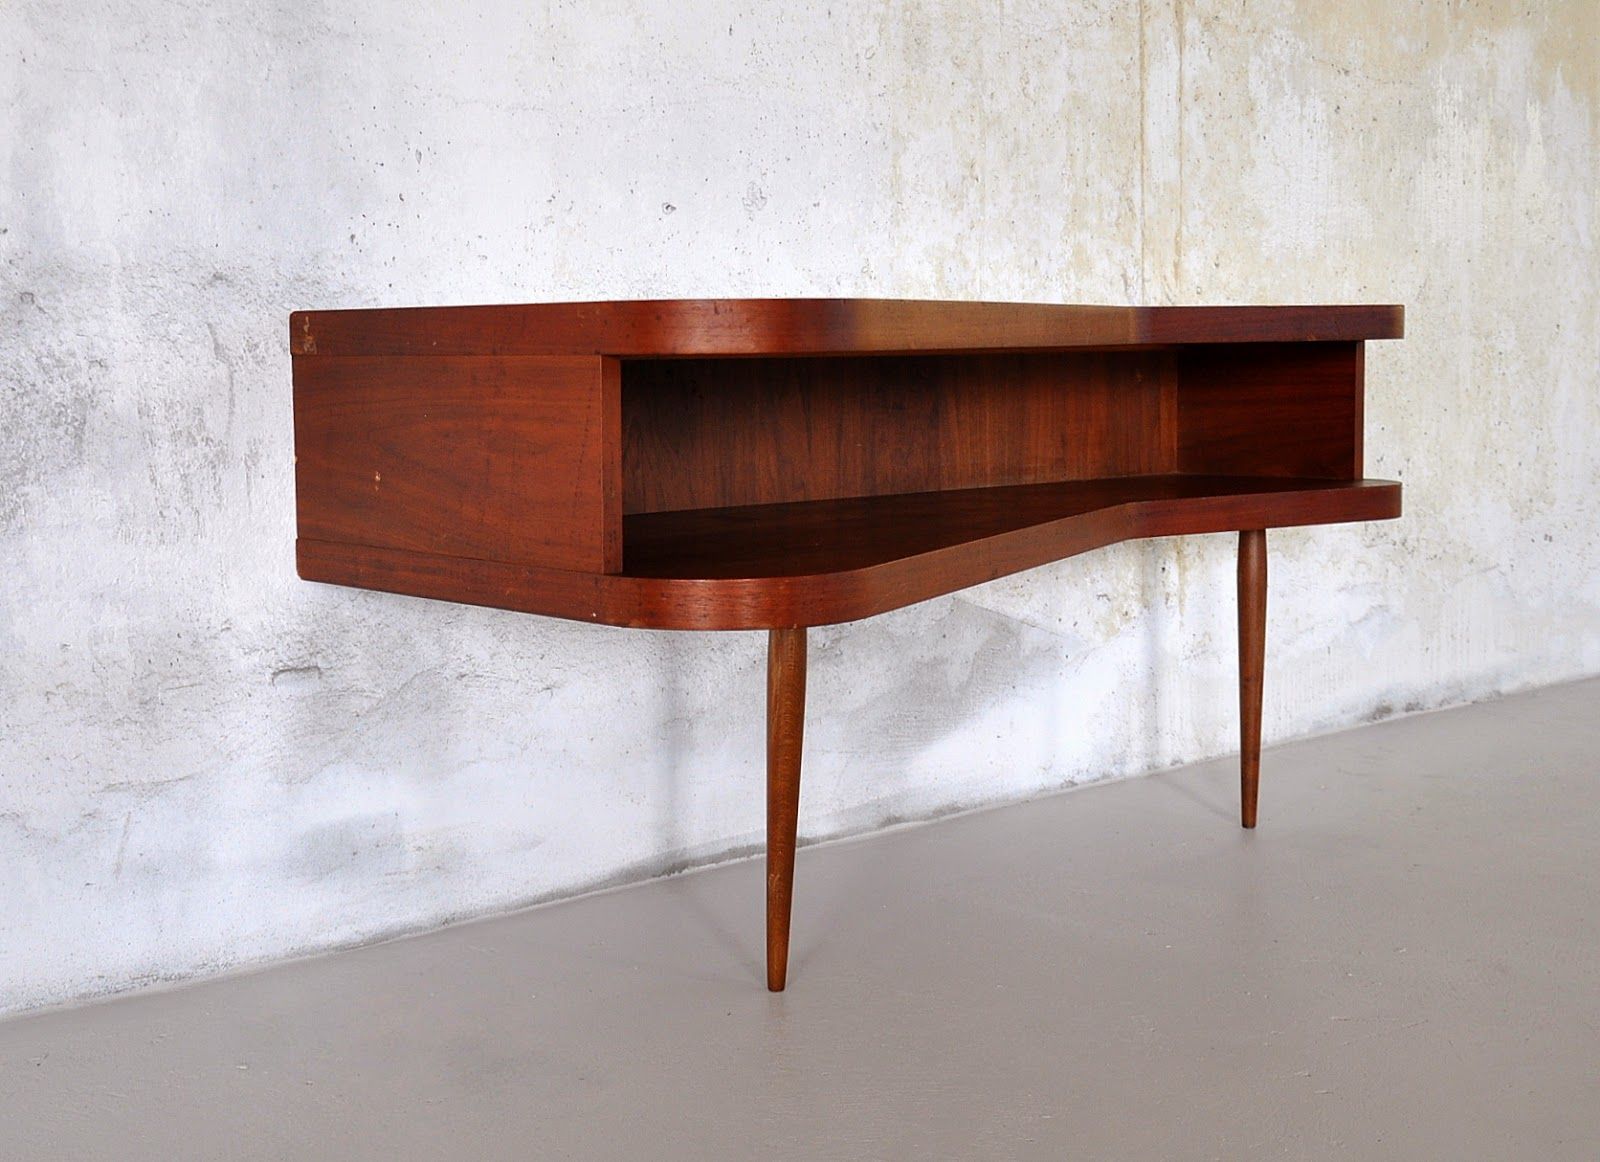 Select Modern: Danish Modern Console Or Sofa Table Inside Large Modern Console Tables (View 13 of 20)